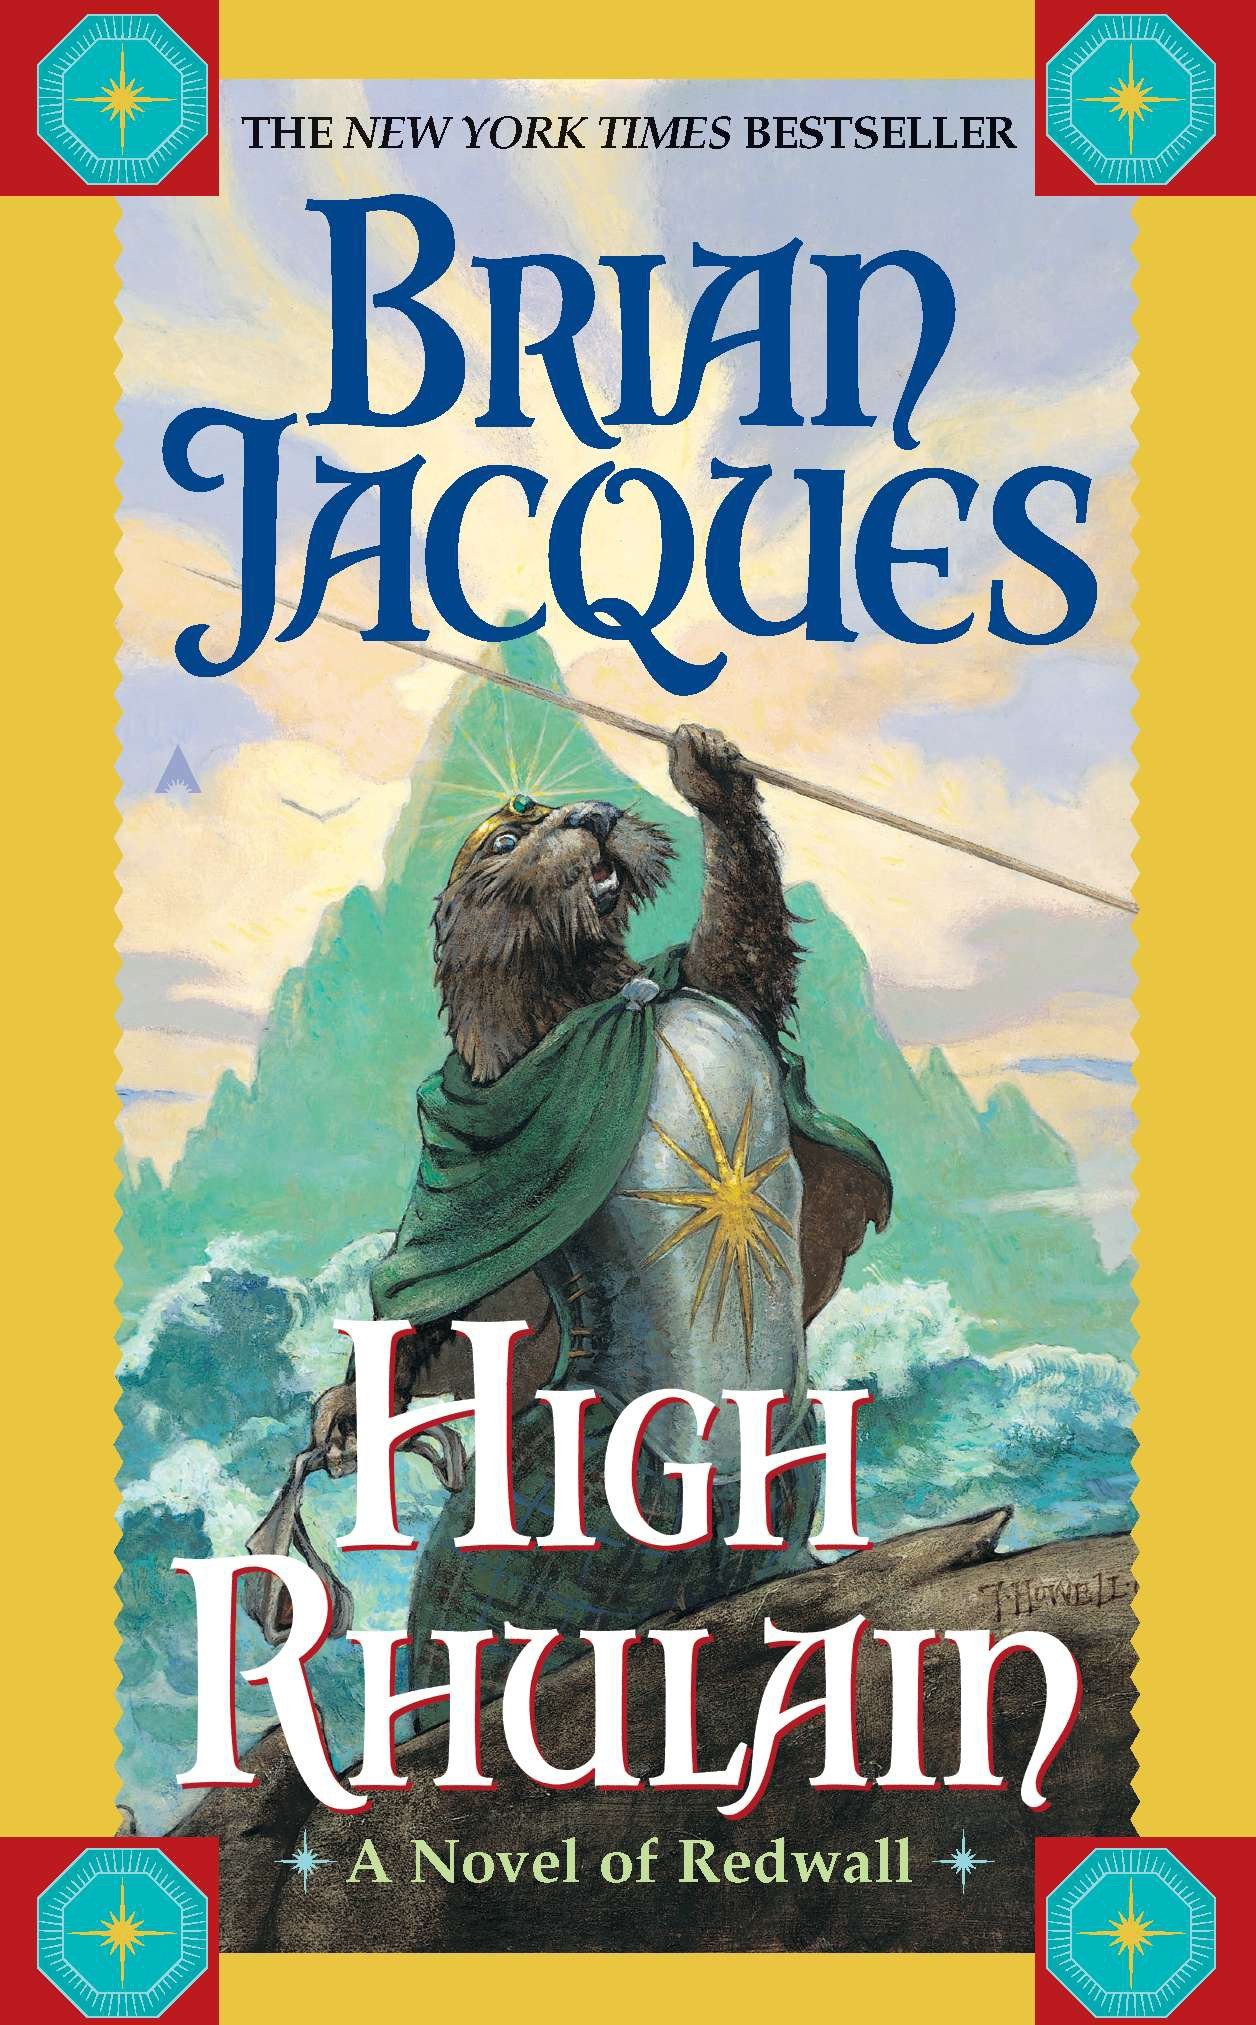 High Rhulain: A Novel of Redwall By Brian Jacques